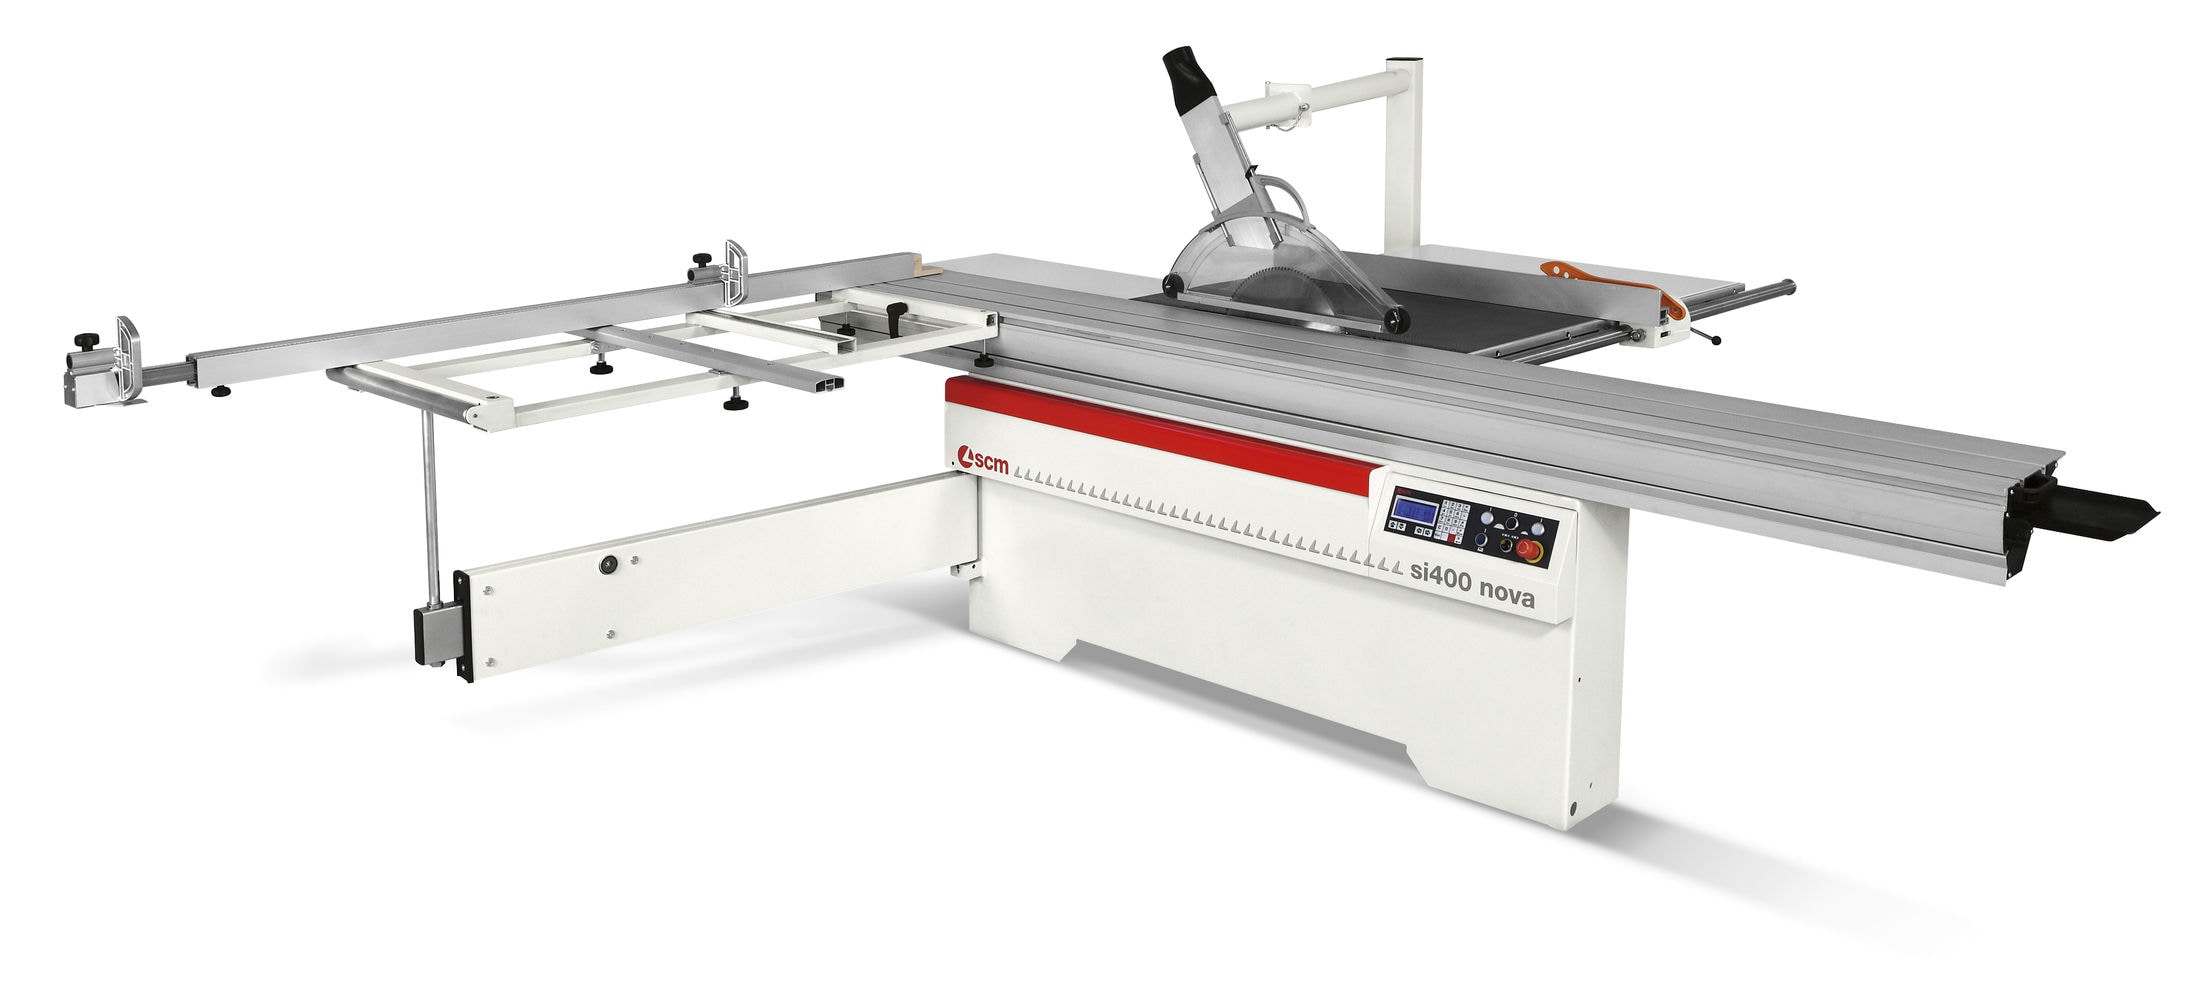 New 3.8m Panel Saw Now Available